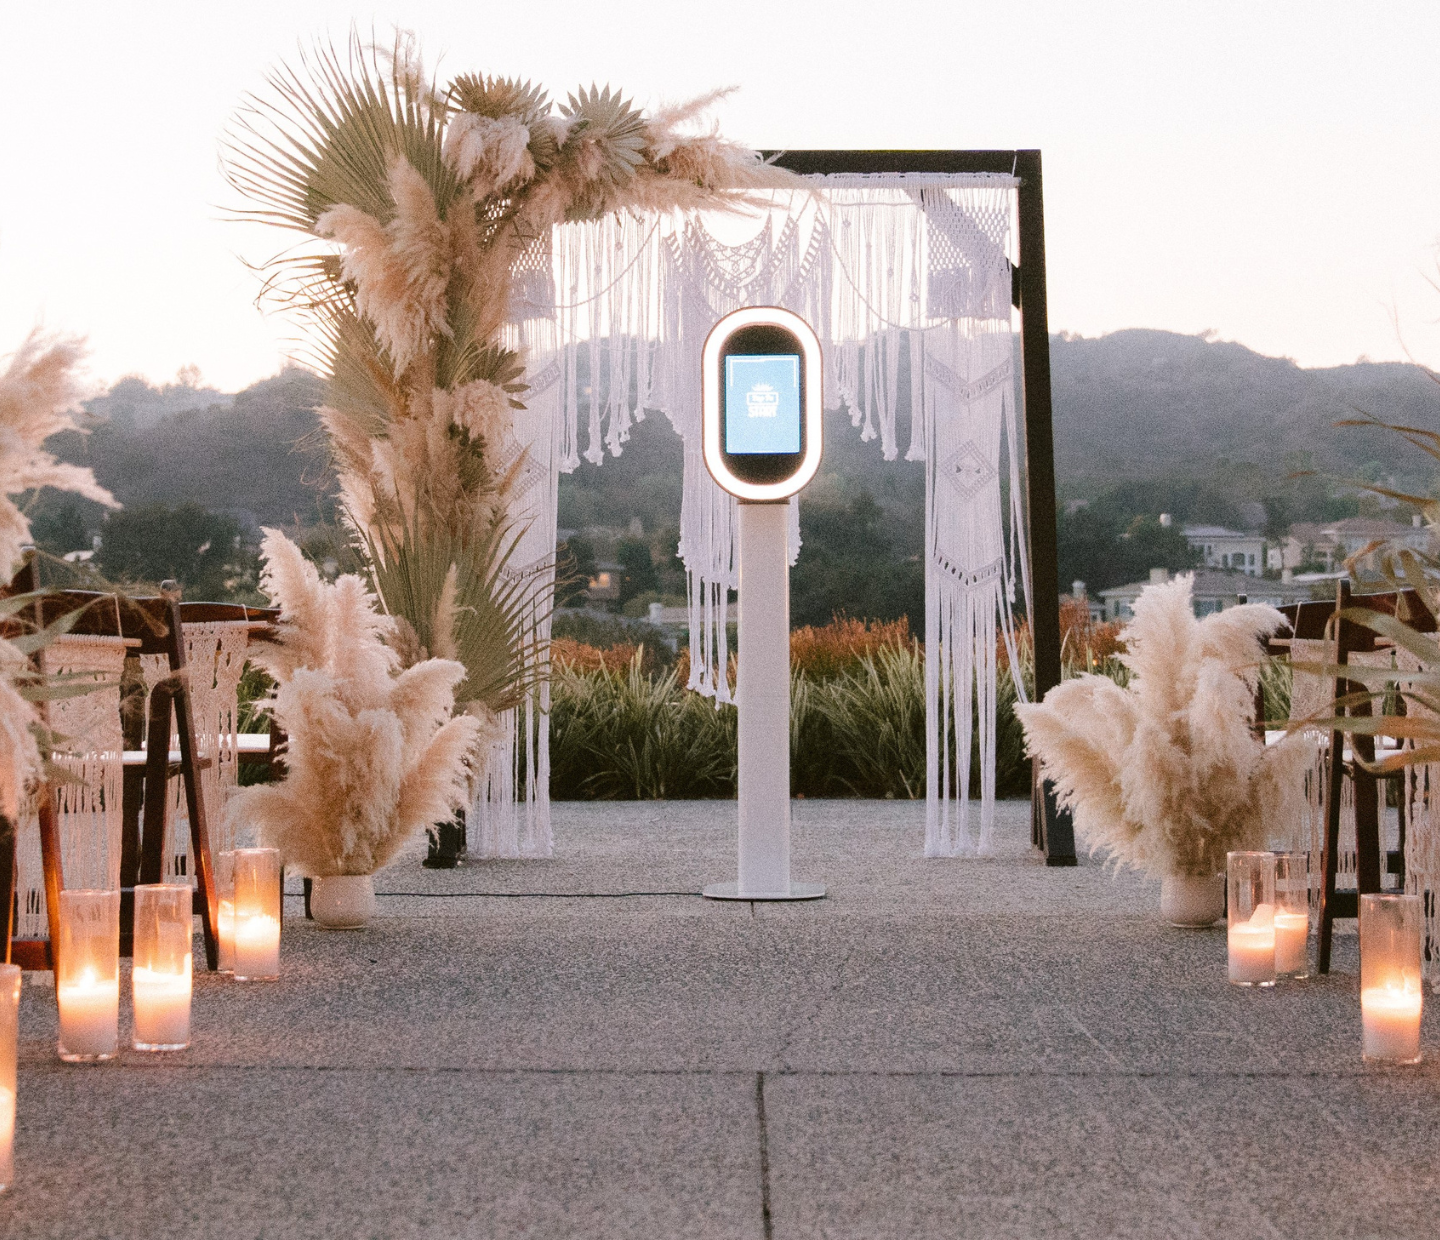 Outdoor setting with palms, dried feathery leaves, chairs, lamps and a decorative gazebo with tassels and a photo booth in the center. Along with a mountainous background.